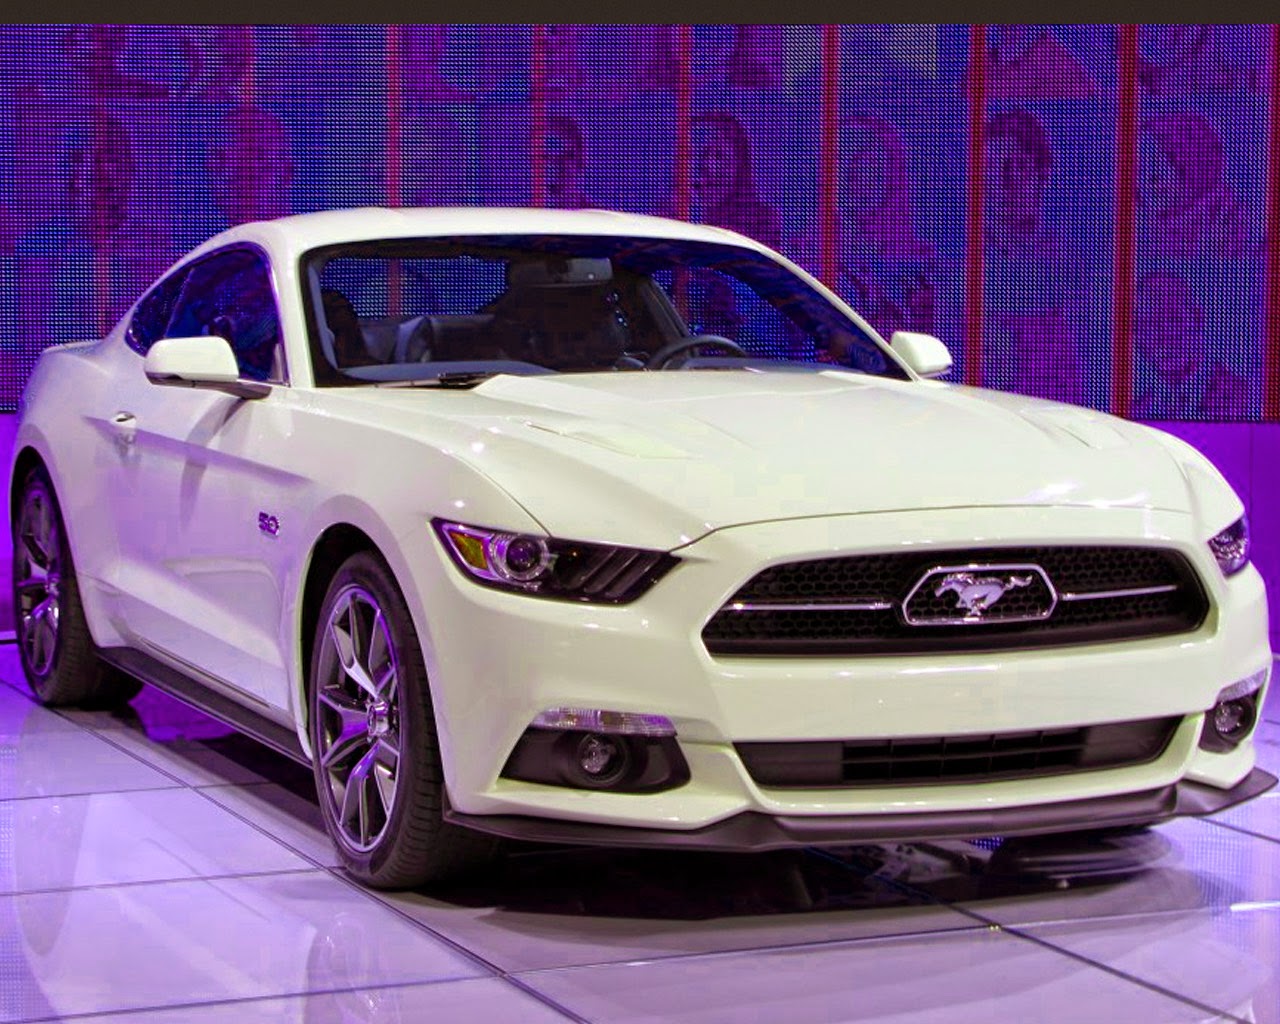 Ford Mustang (first generation) - Wikipedia